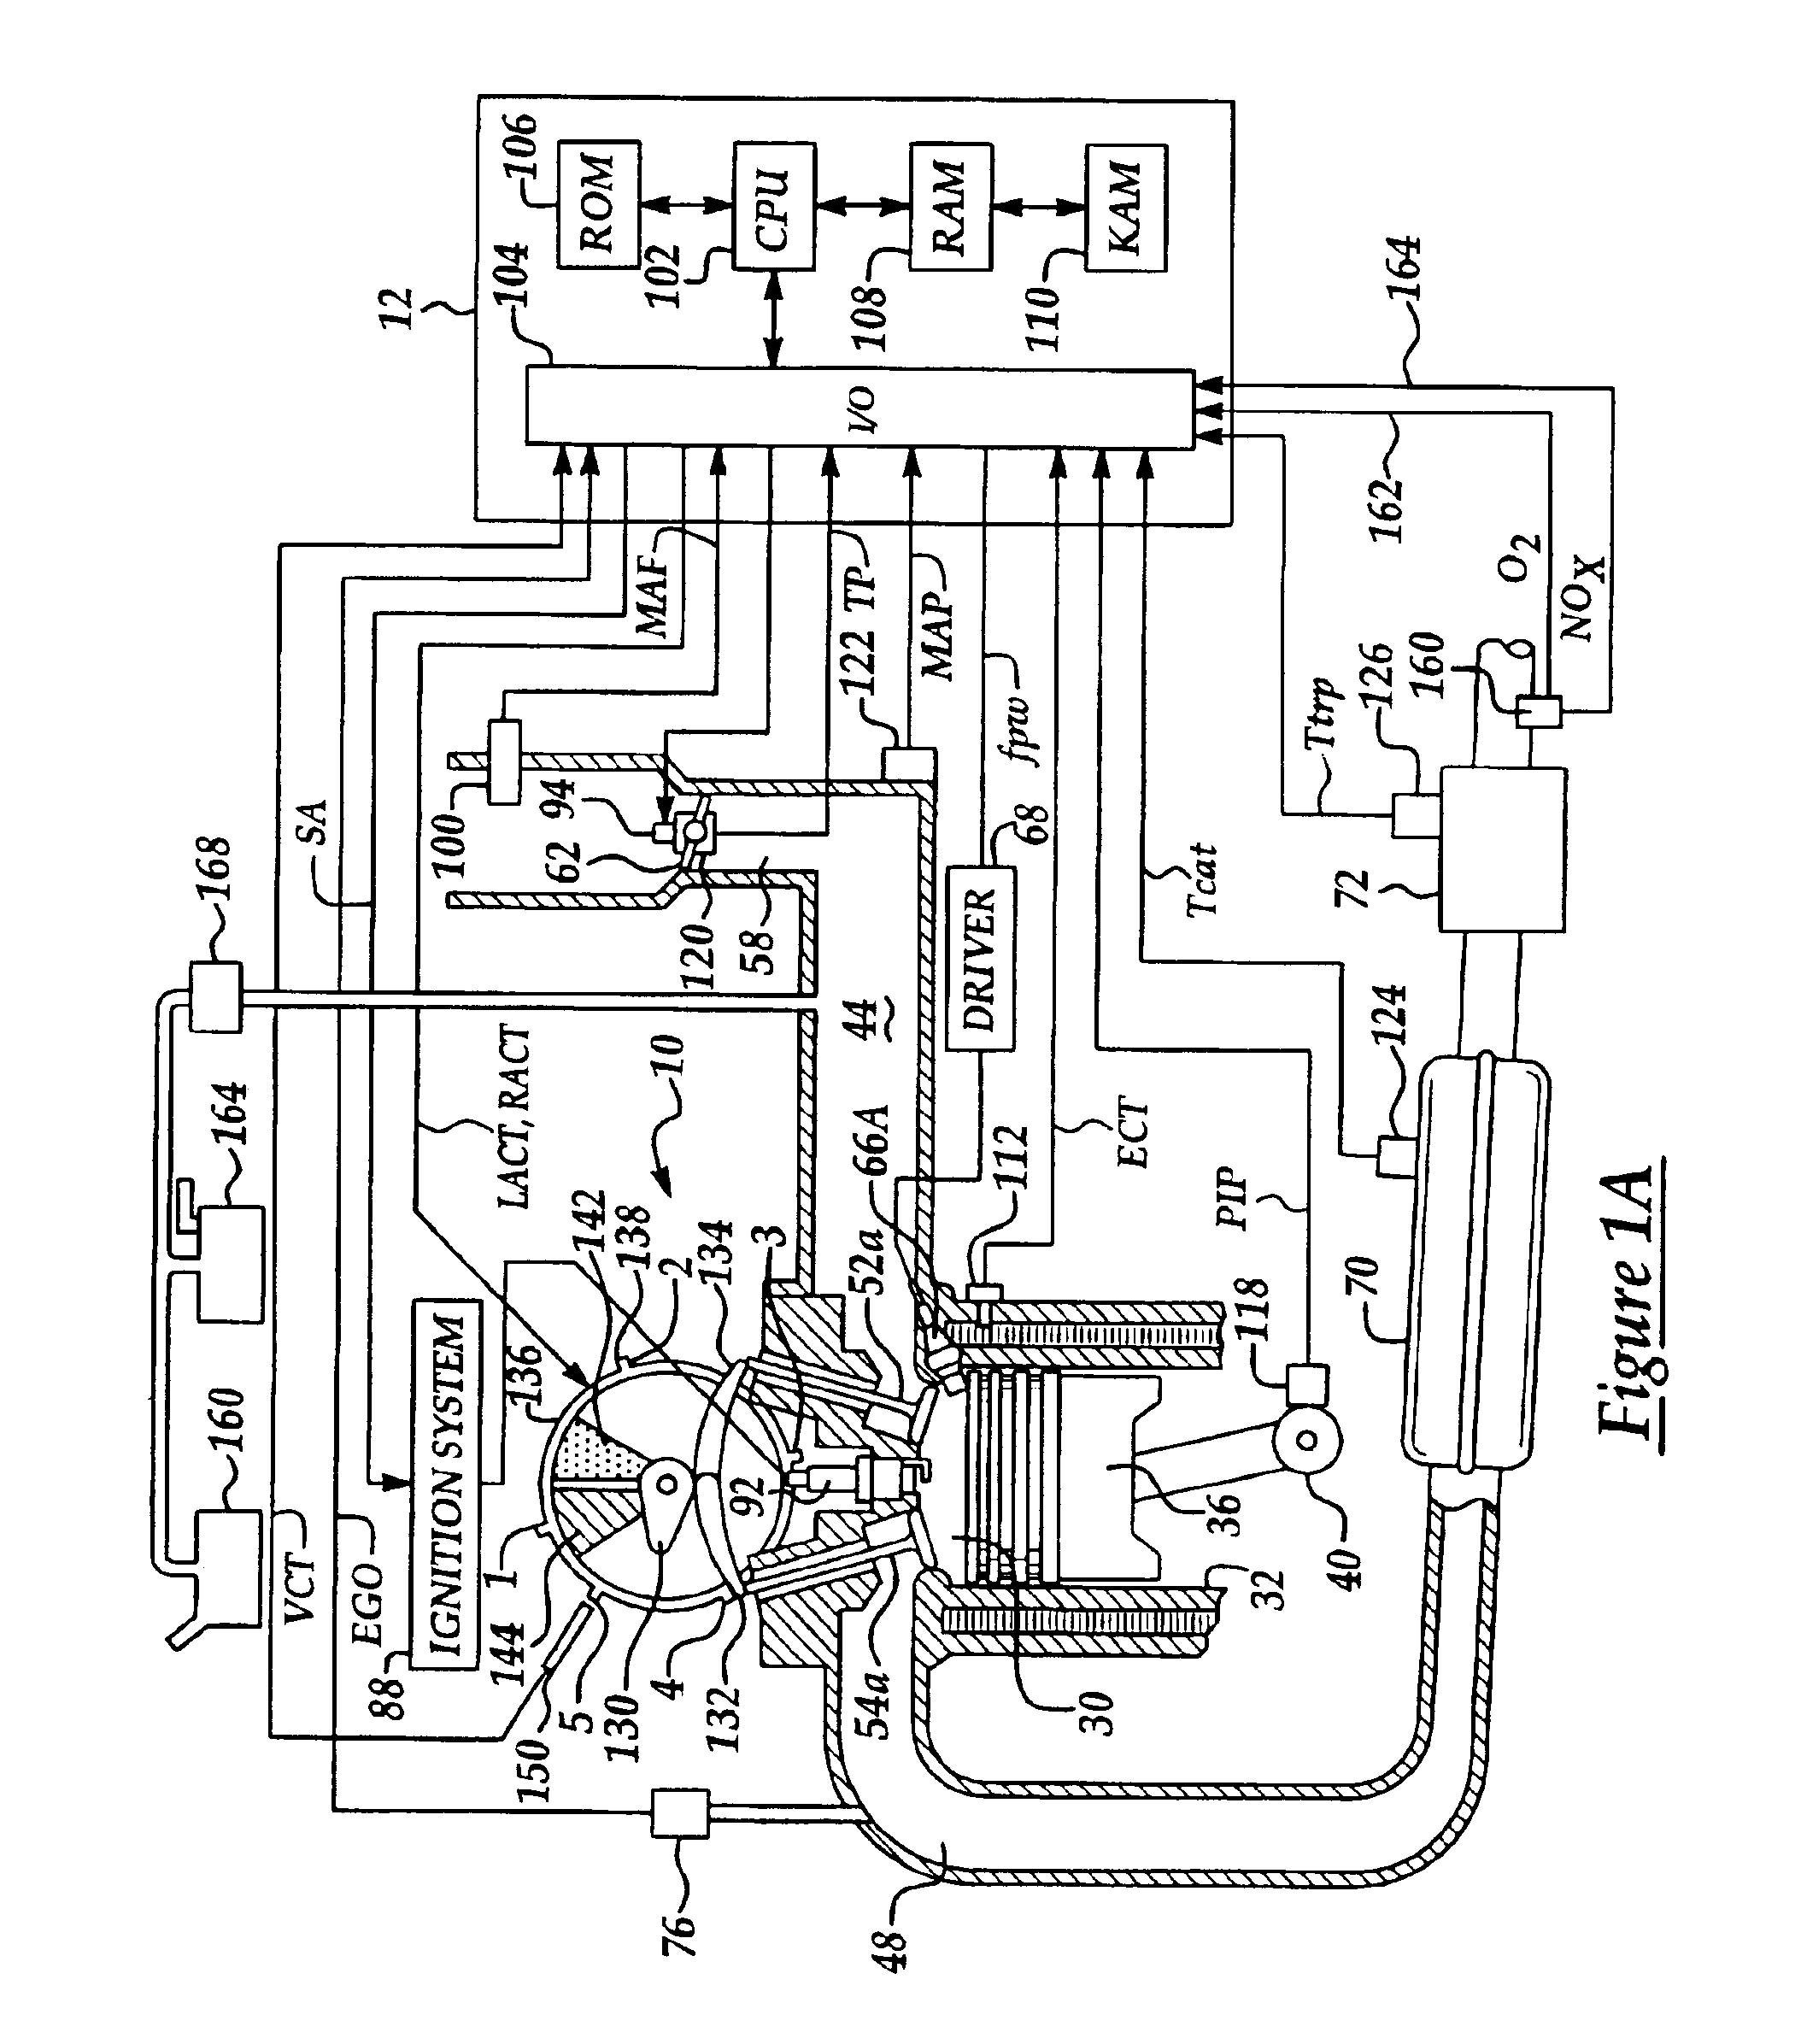 Method and system of adaptive learning for engine exhaust gas sensors